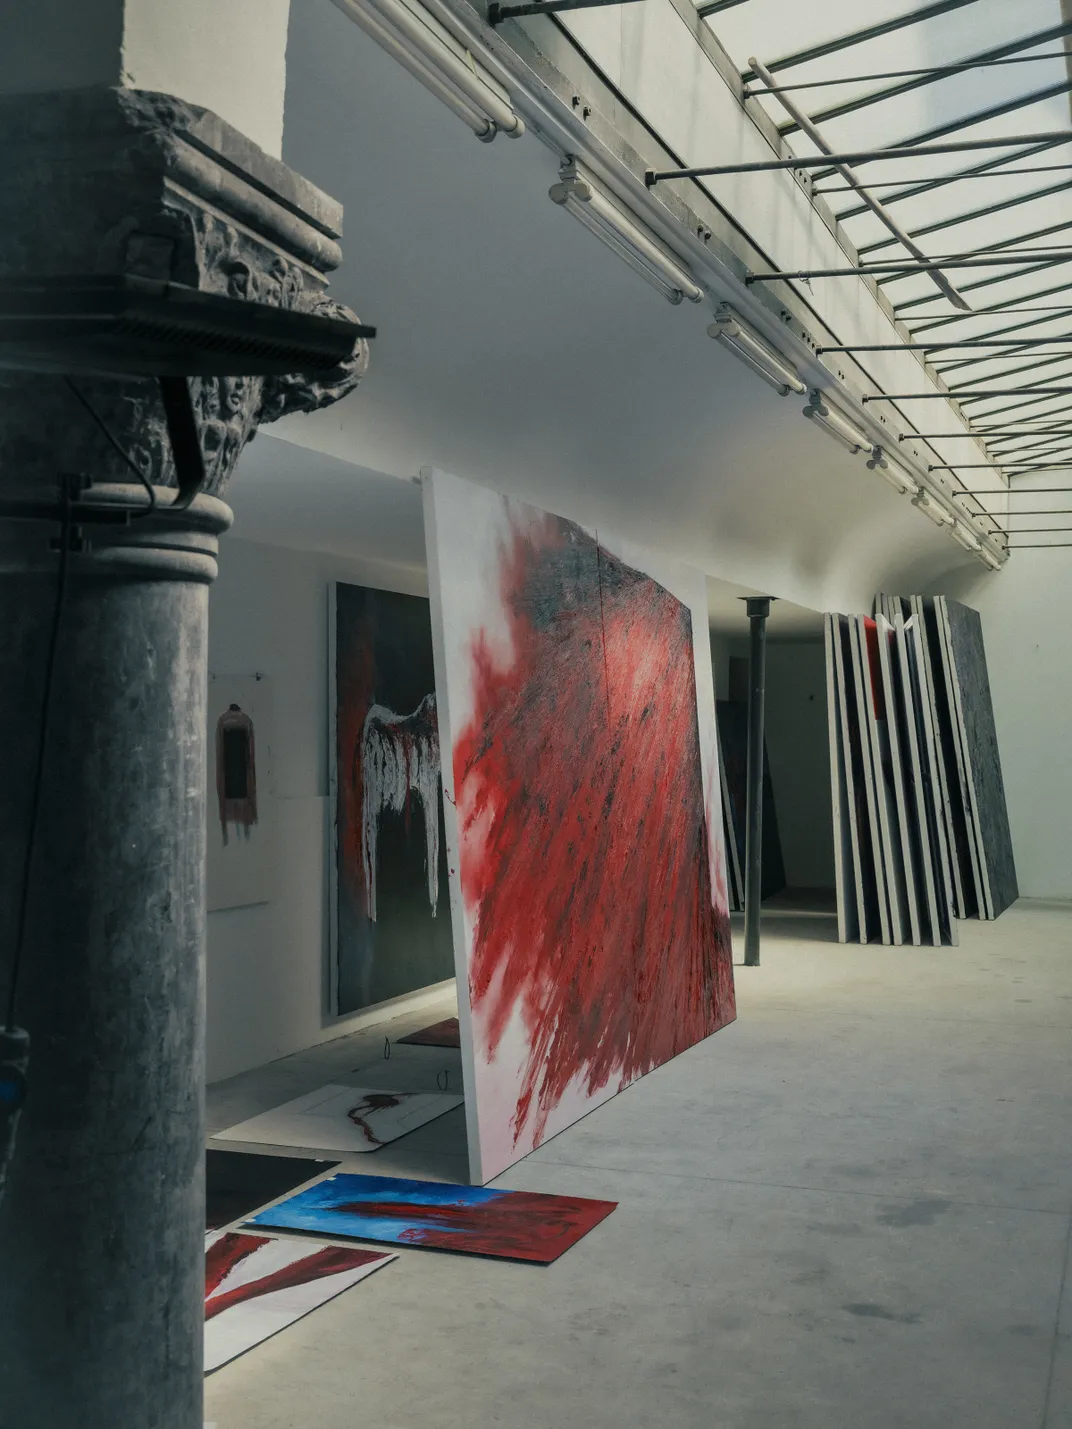 Both Kapoor’s wax and silicone works, often on canvas, led him to painting as “a logical step,” he says. Many of the works in his studio remain untitled.